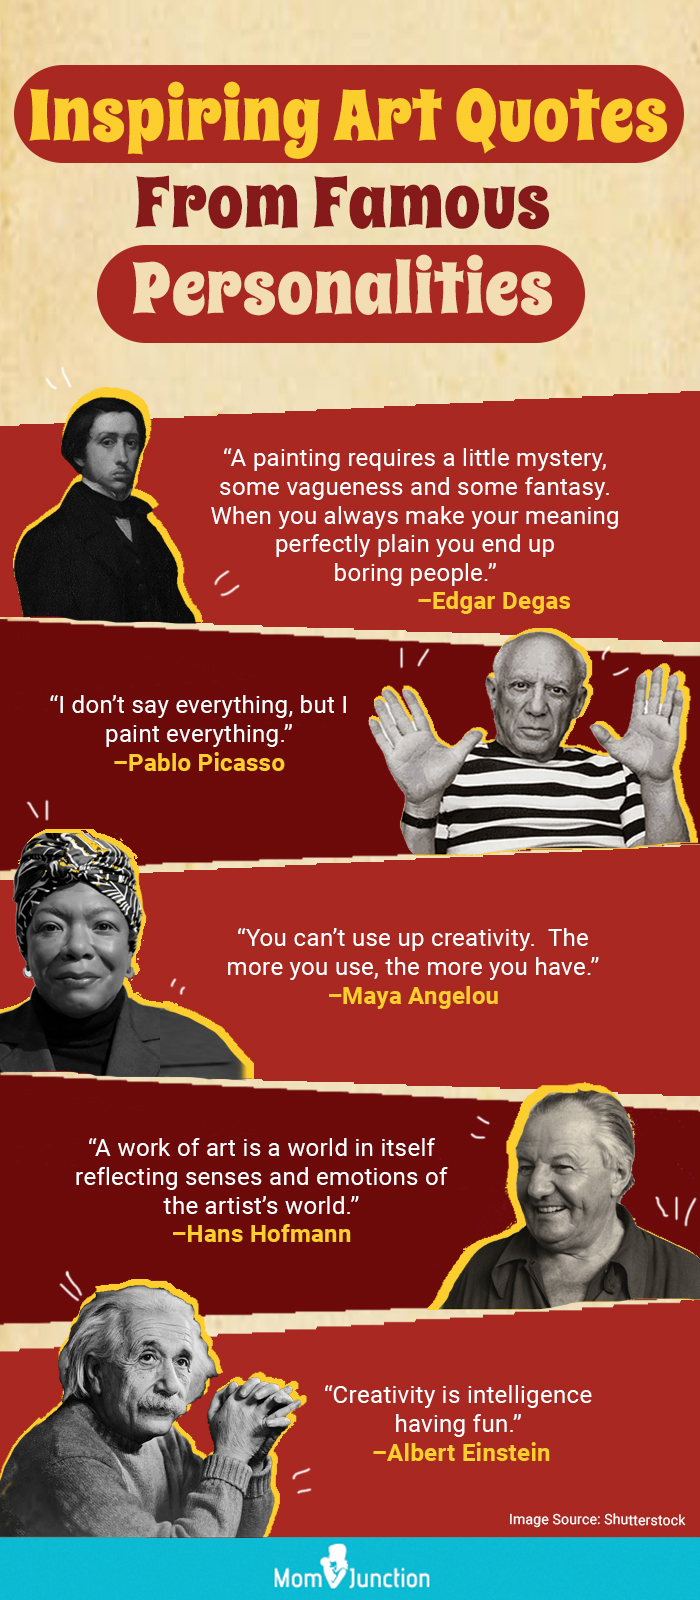 inspiring art quotes from famous personalities (infographic)